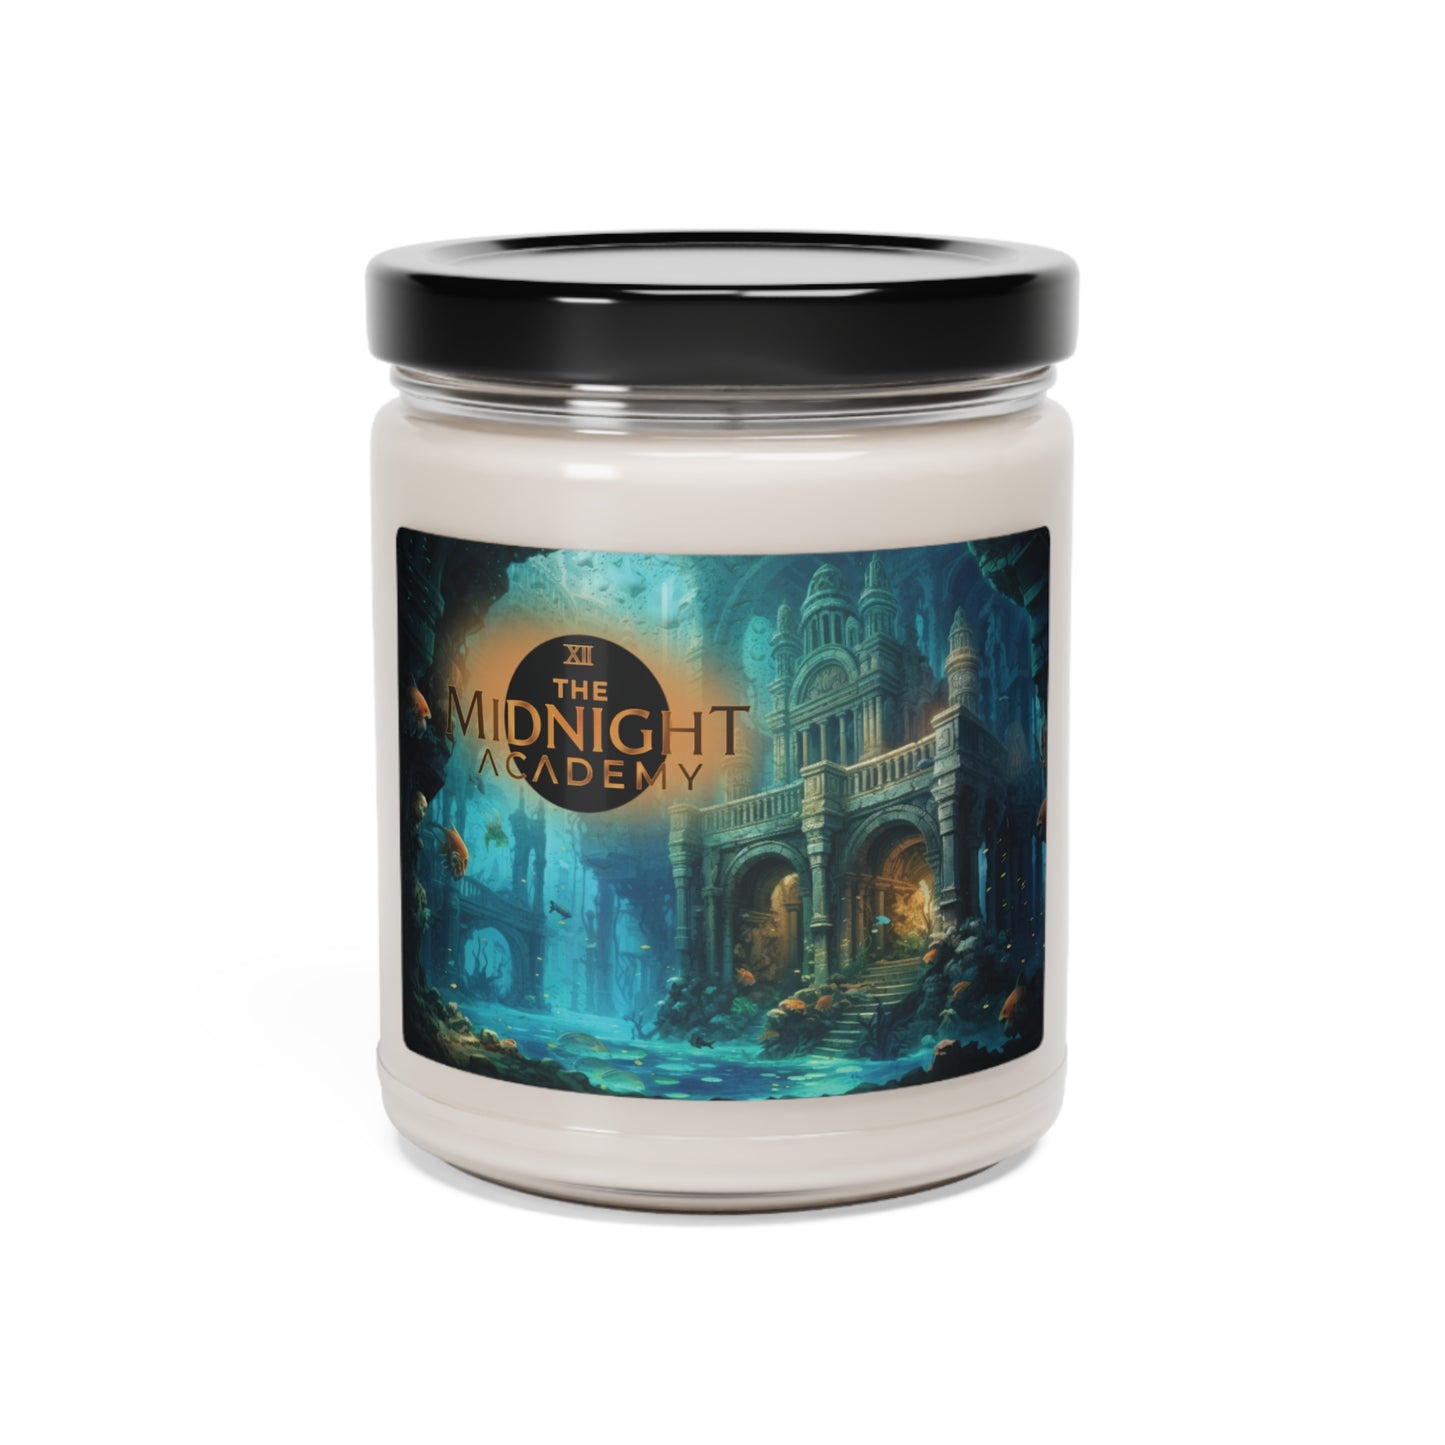 Atlantis Whisper - Aquatic Floral Scented Soy Candle, 9oz